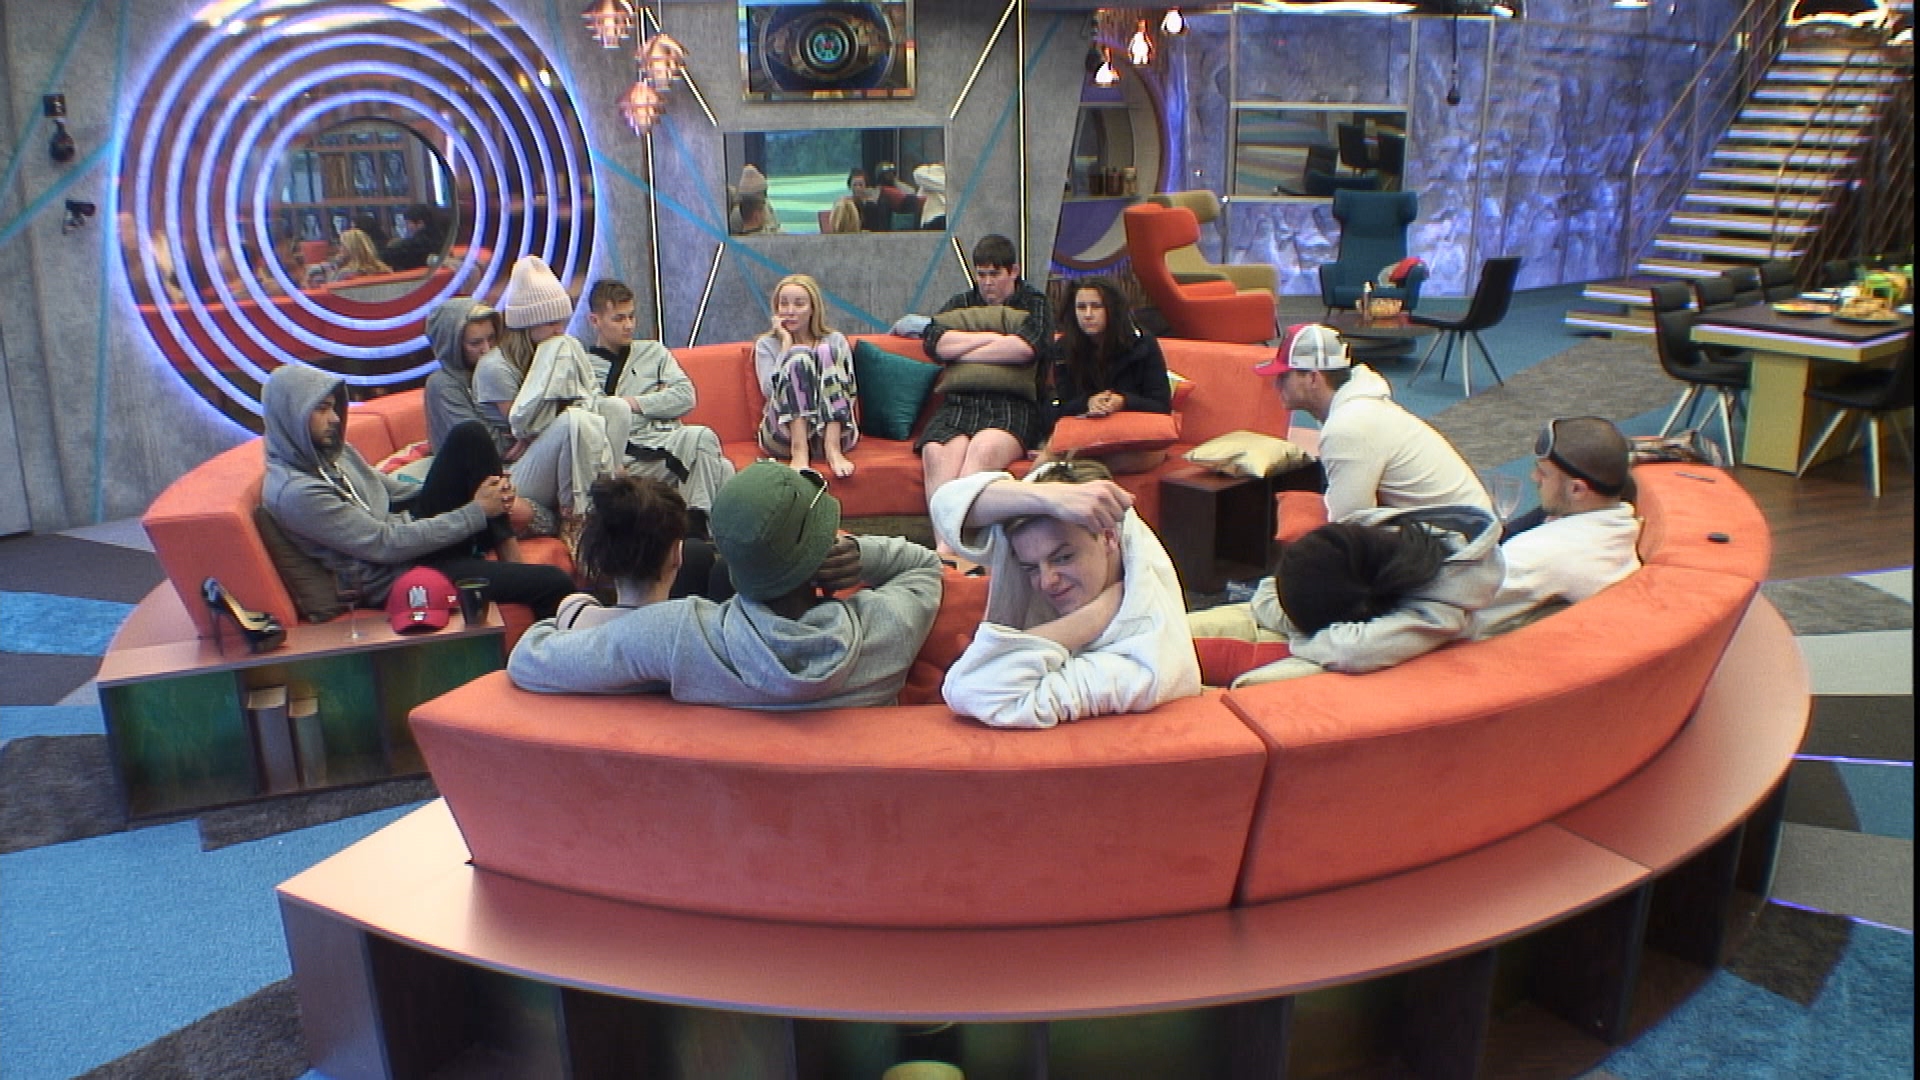 Day 13: Housemates are angered by nominations rule break